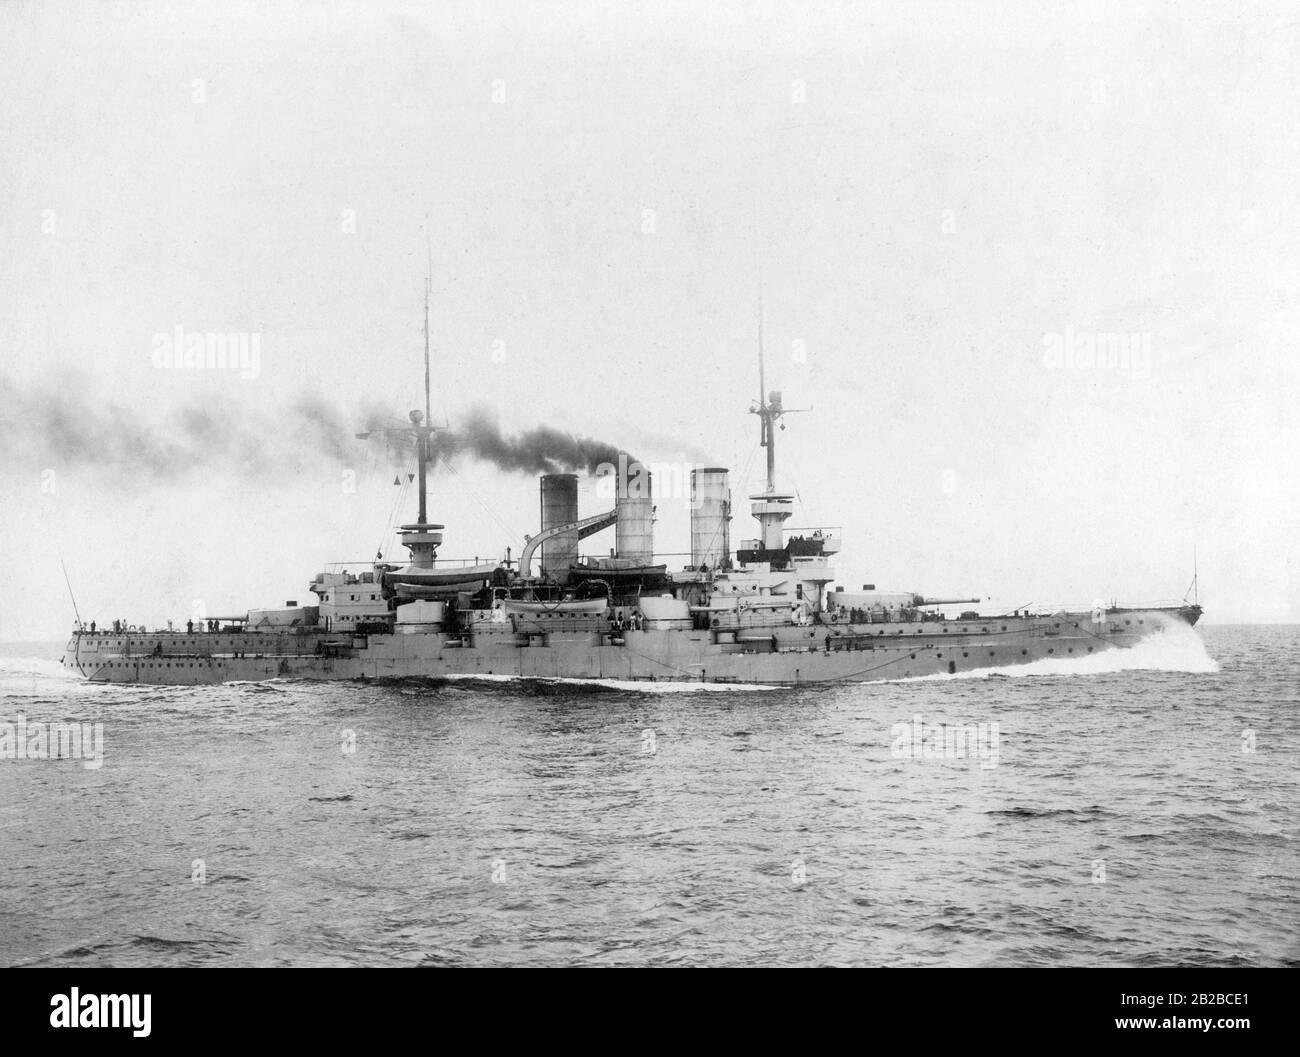 The SMS Preussen was a Braunschweig class liner of the former Imperial Navy. She was named after the Kingdom of Prussia, at that time the largest part of the German Empire. During the First World War, the Preussen was the flagship of the II Squadron of the High Seas Fleet, first under Vice Admiral Reinhard Scheer then under Rear Admiral Franz Mauve. Stock Photo